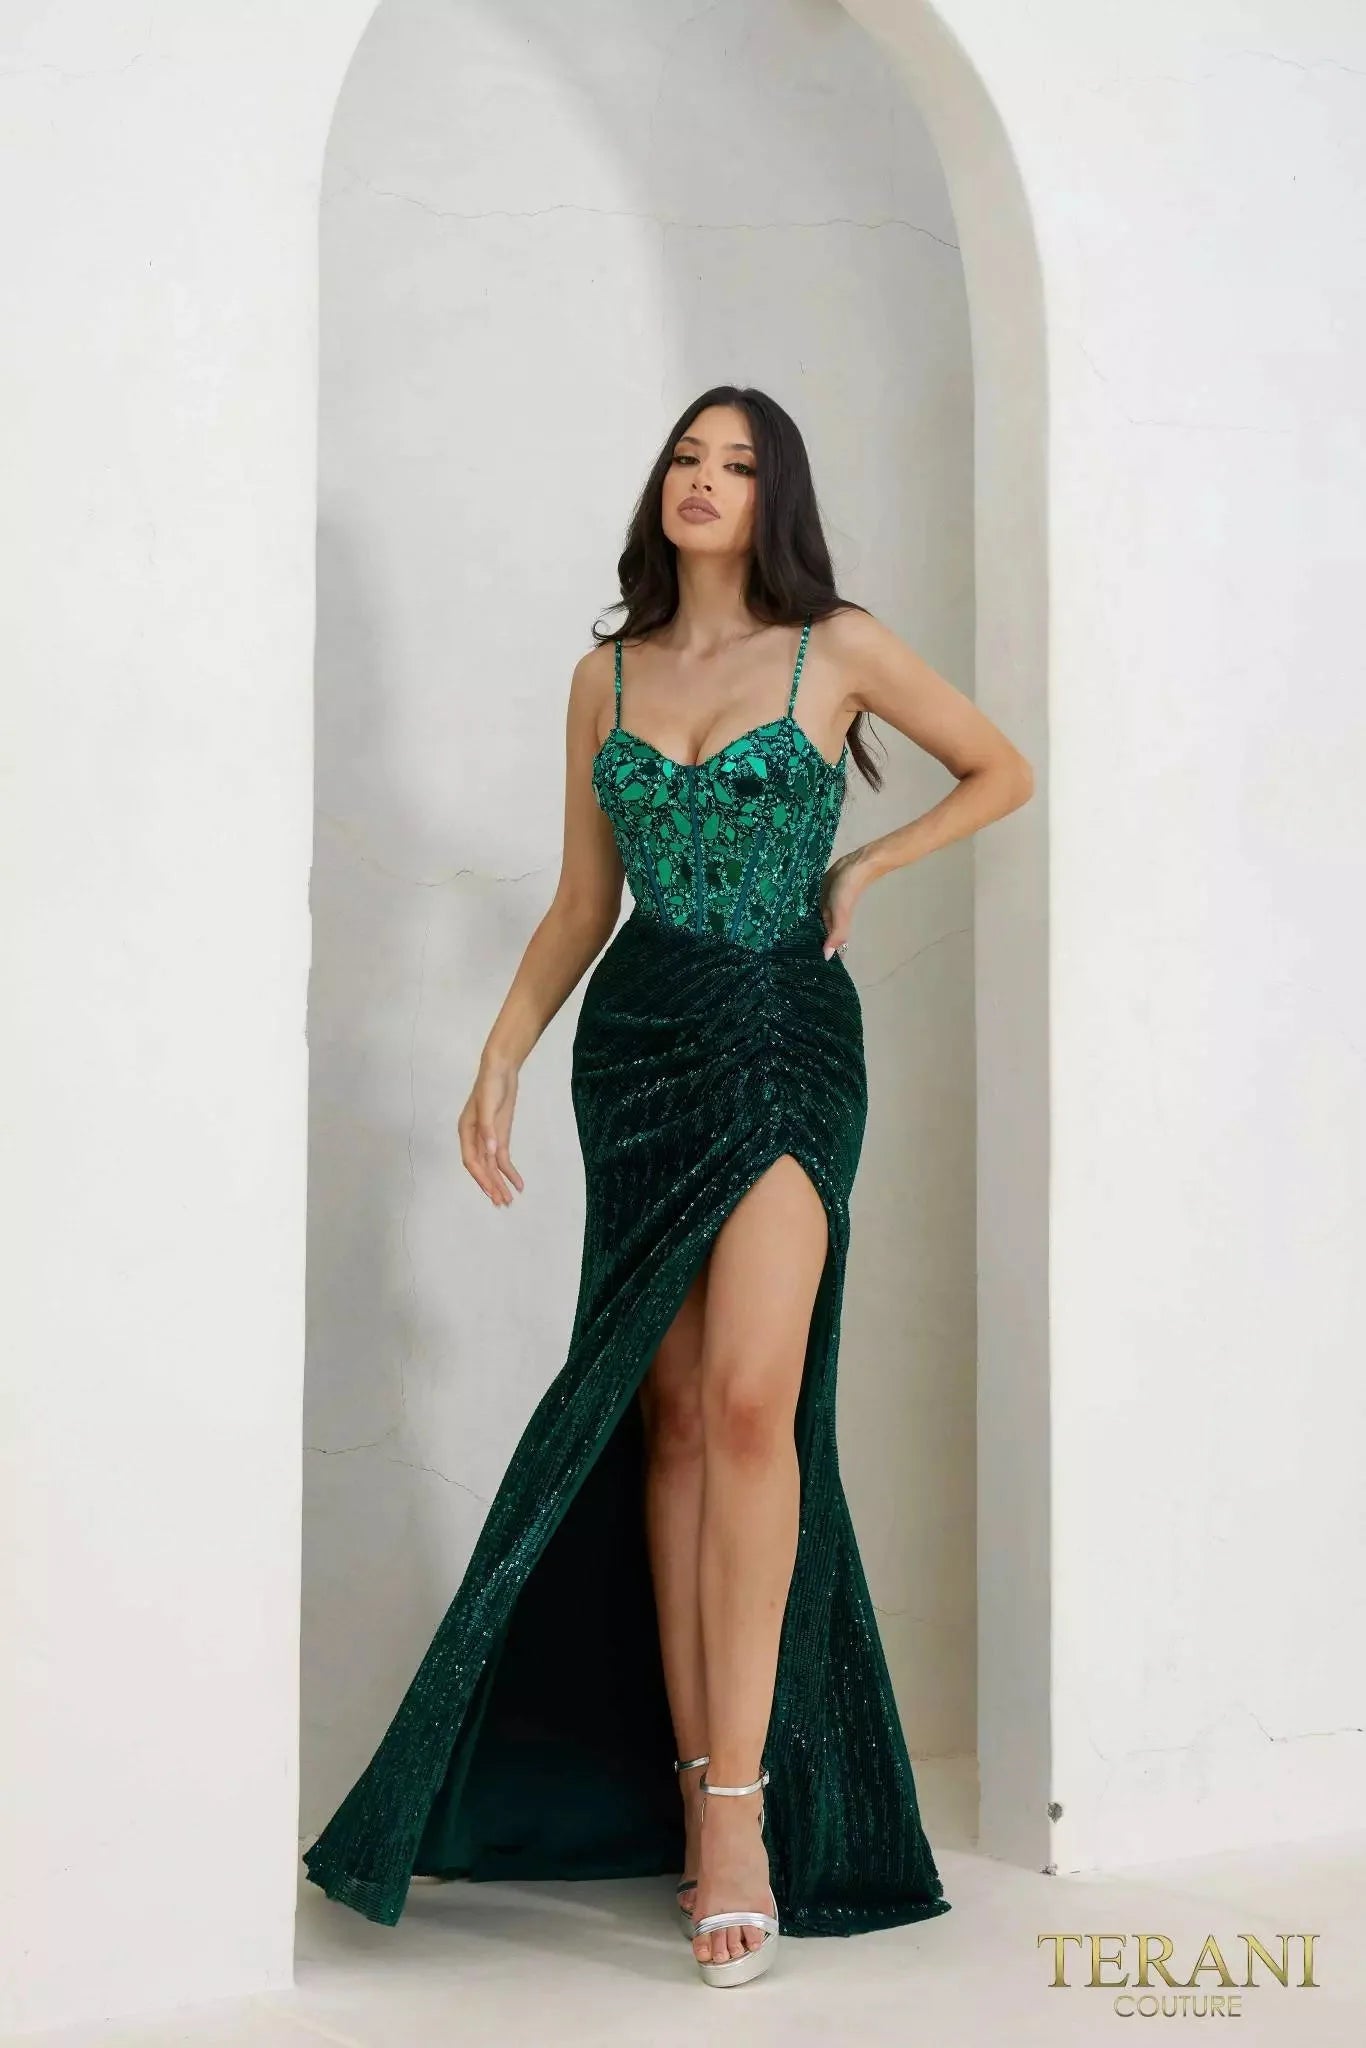 Terani Couture 241P2119 - Sequin Slit Prom Dress Special Occasion Dress